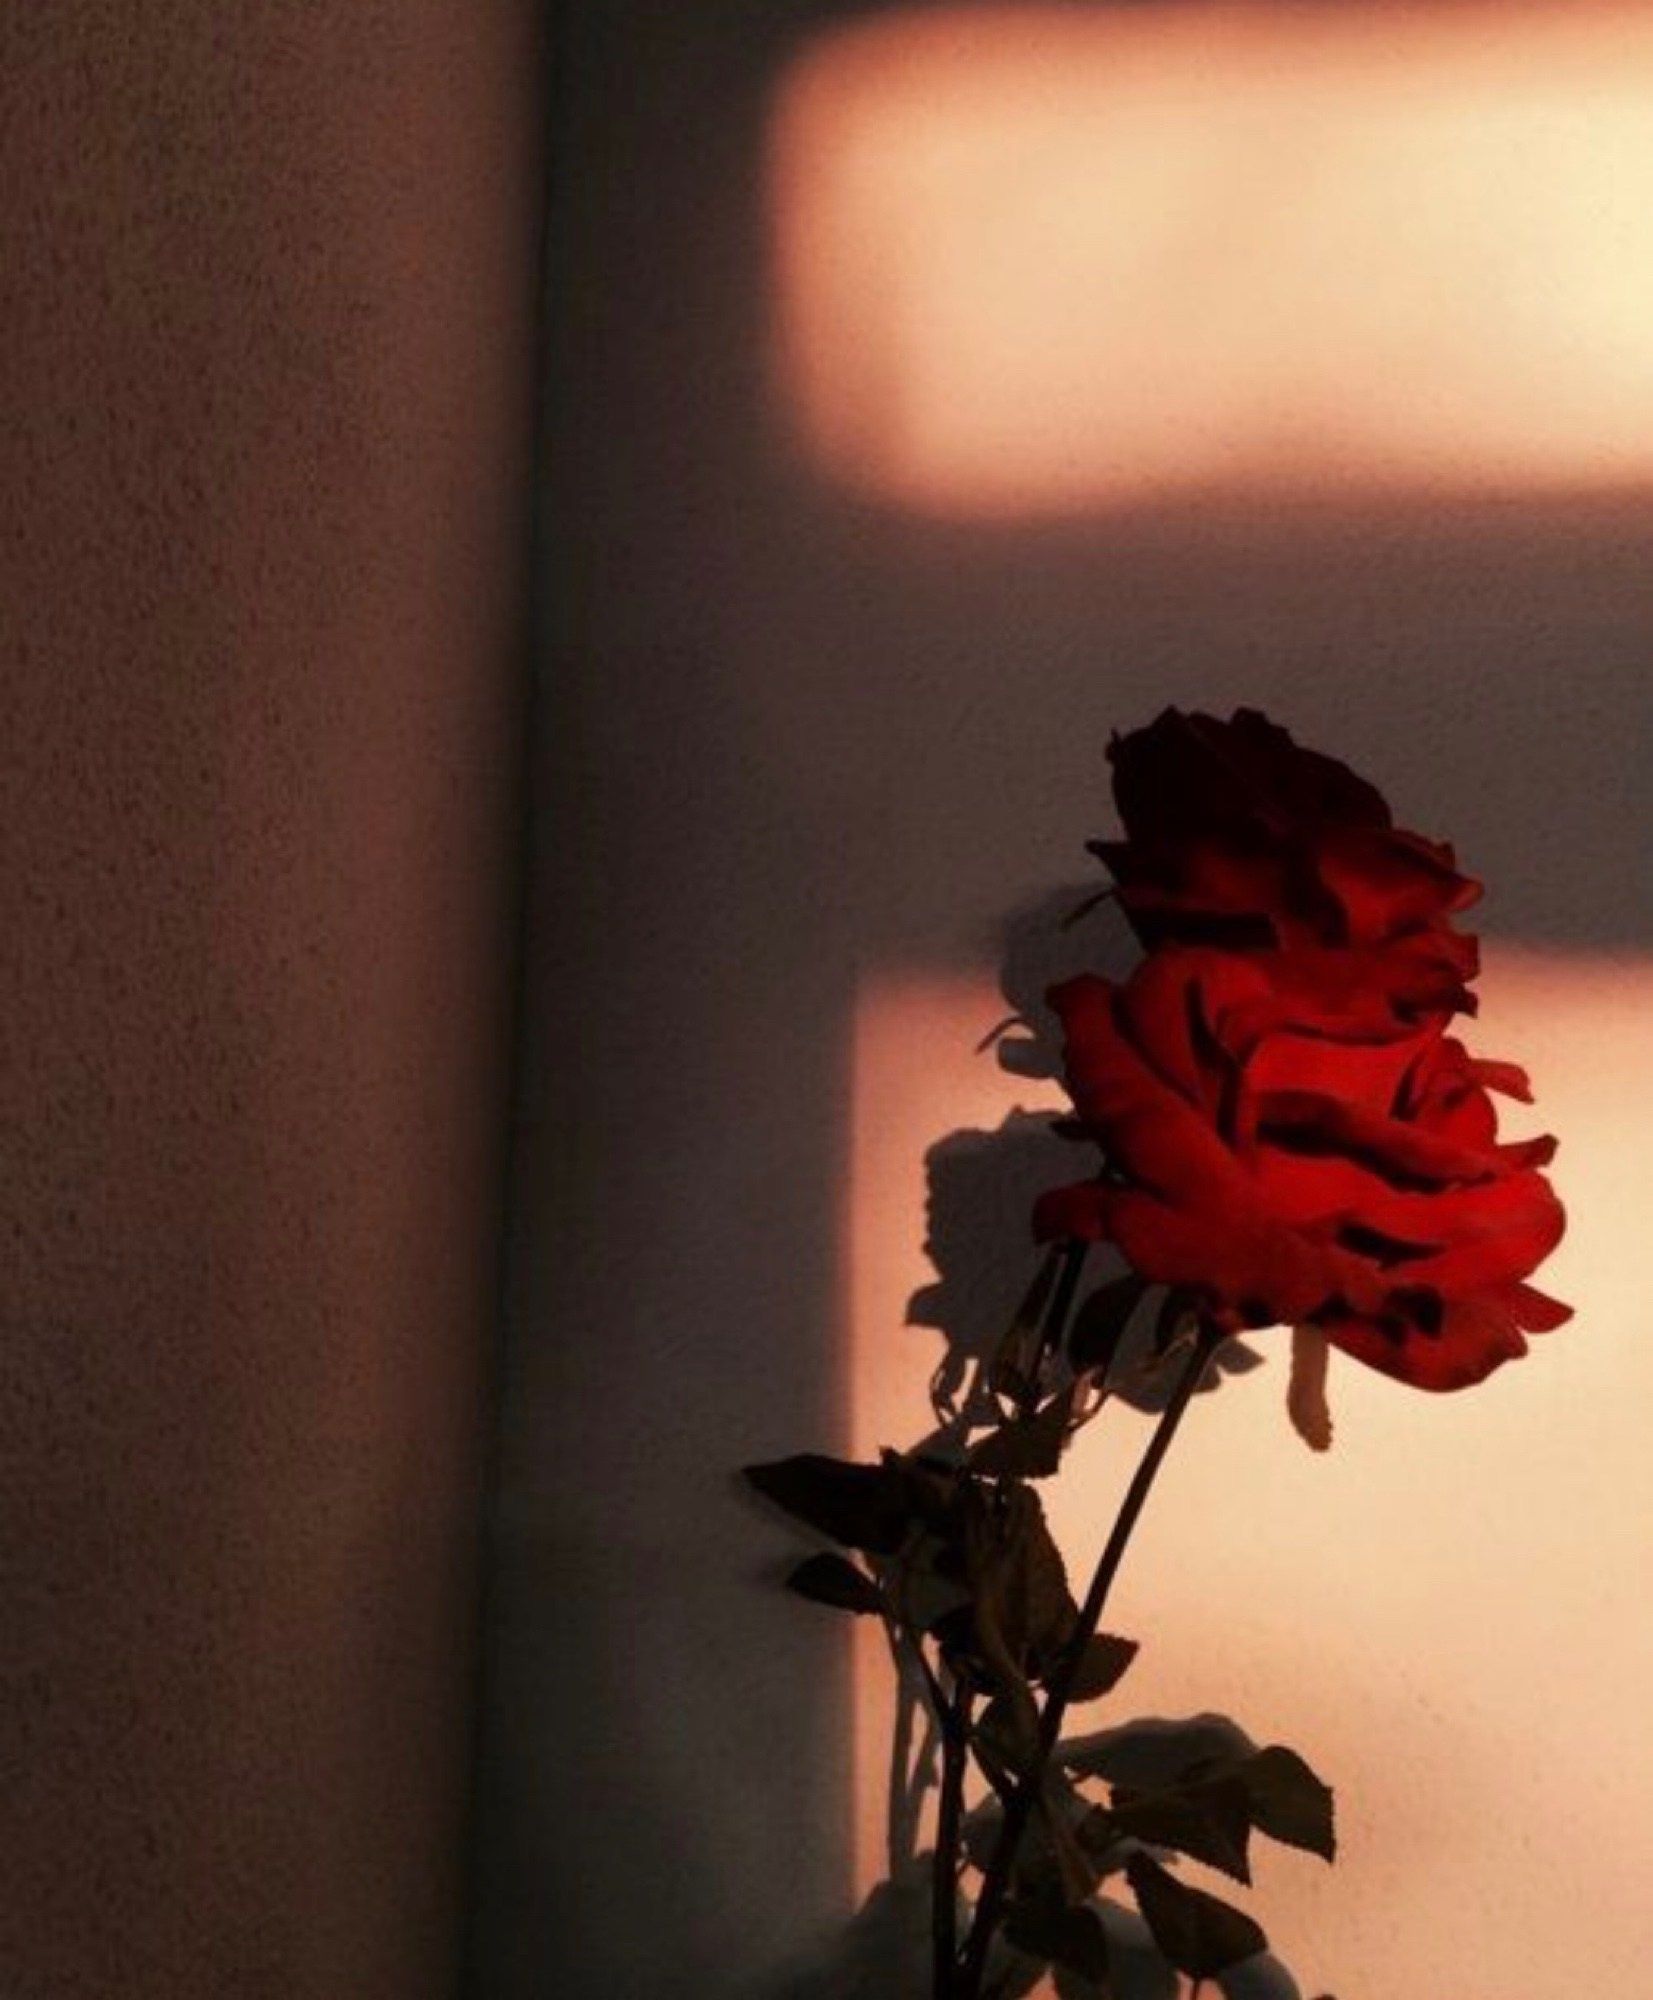 A red rose leaning against a wall - Roses